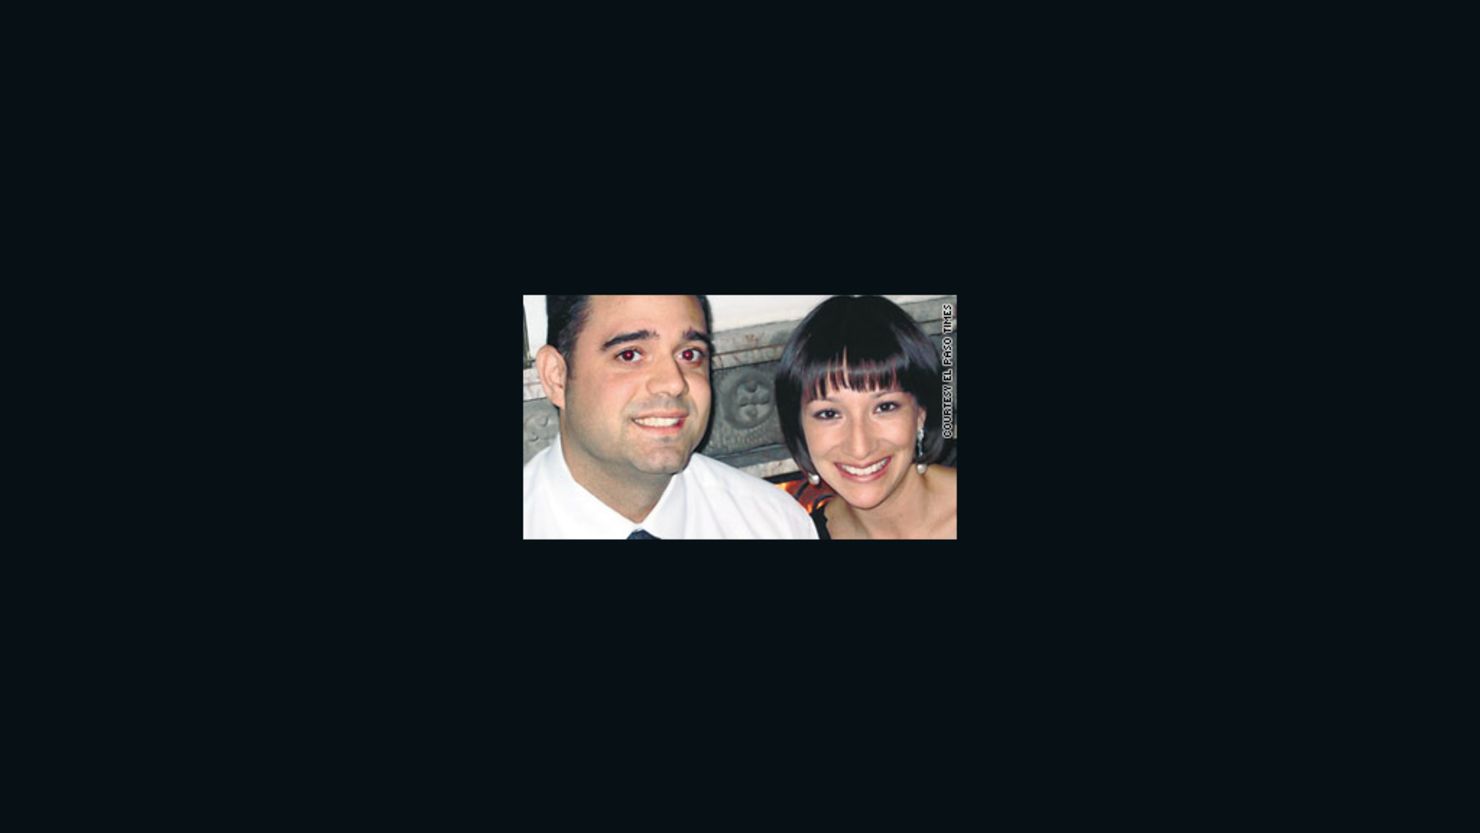 Lesley Enriquez and Arthur Redelfs were killed in March 2010 after leaving a birthday party.